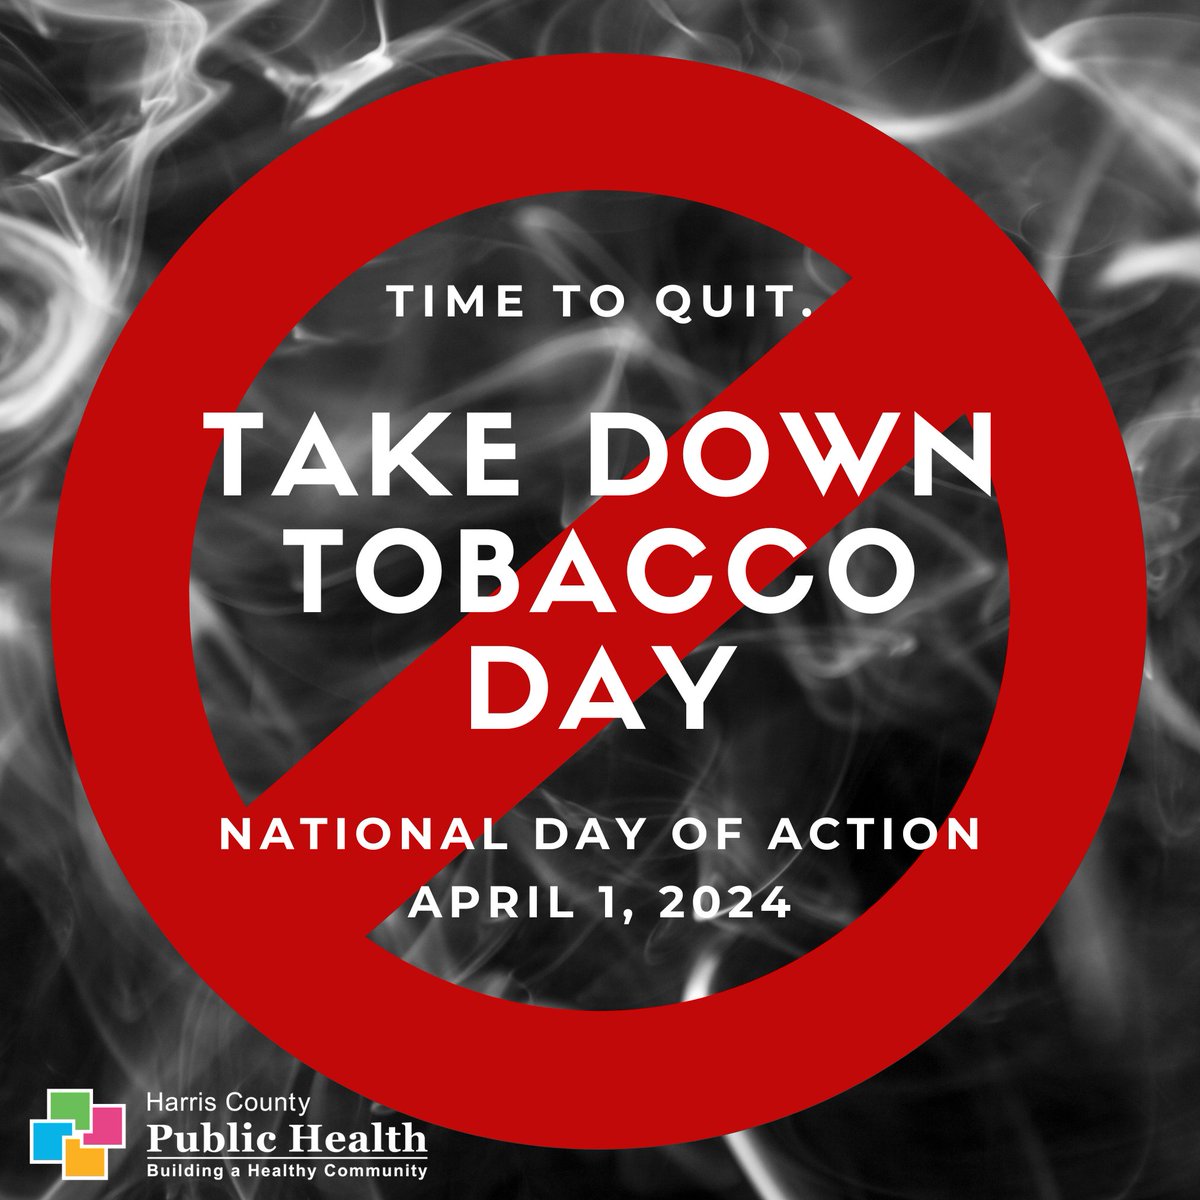 April 1 is Take Down Tobacco Day! Protecting our youth from smoking is important. Let's teach kids early: smoking isn't cool, it's harmful. Need support quitting? Contact our Tobacco/Vaping Prevention & Cessation Program at 713-274-8501. Say no to tobacco! #TakeDownTobaccoDay